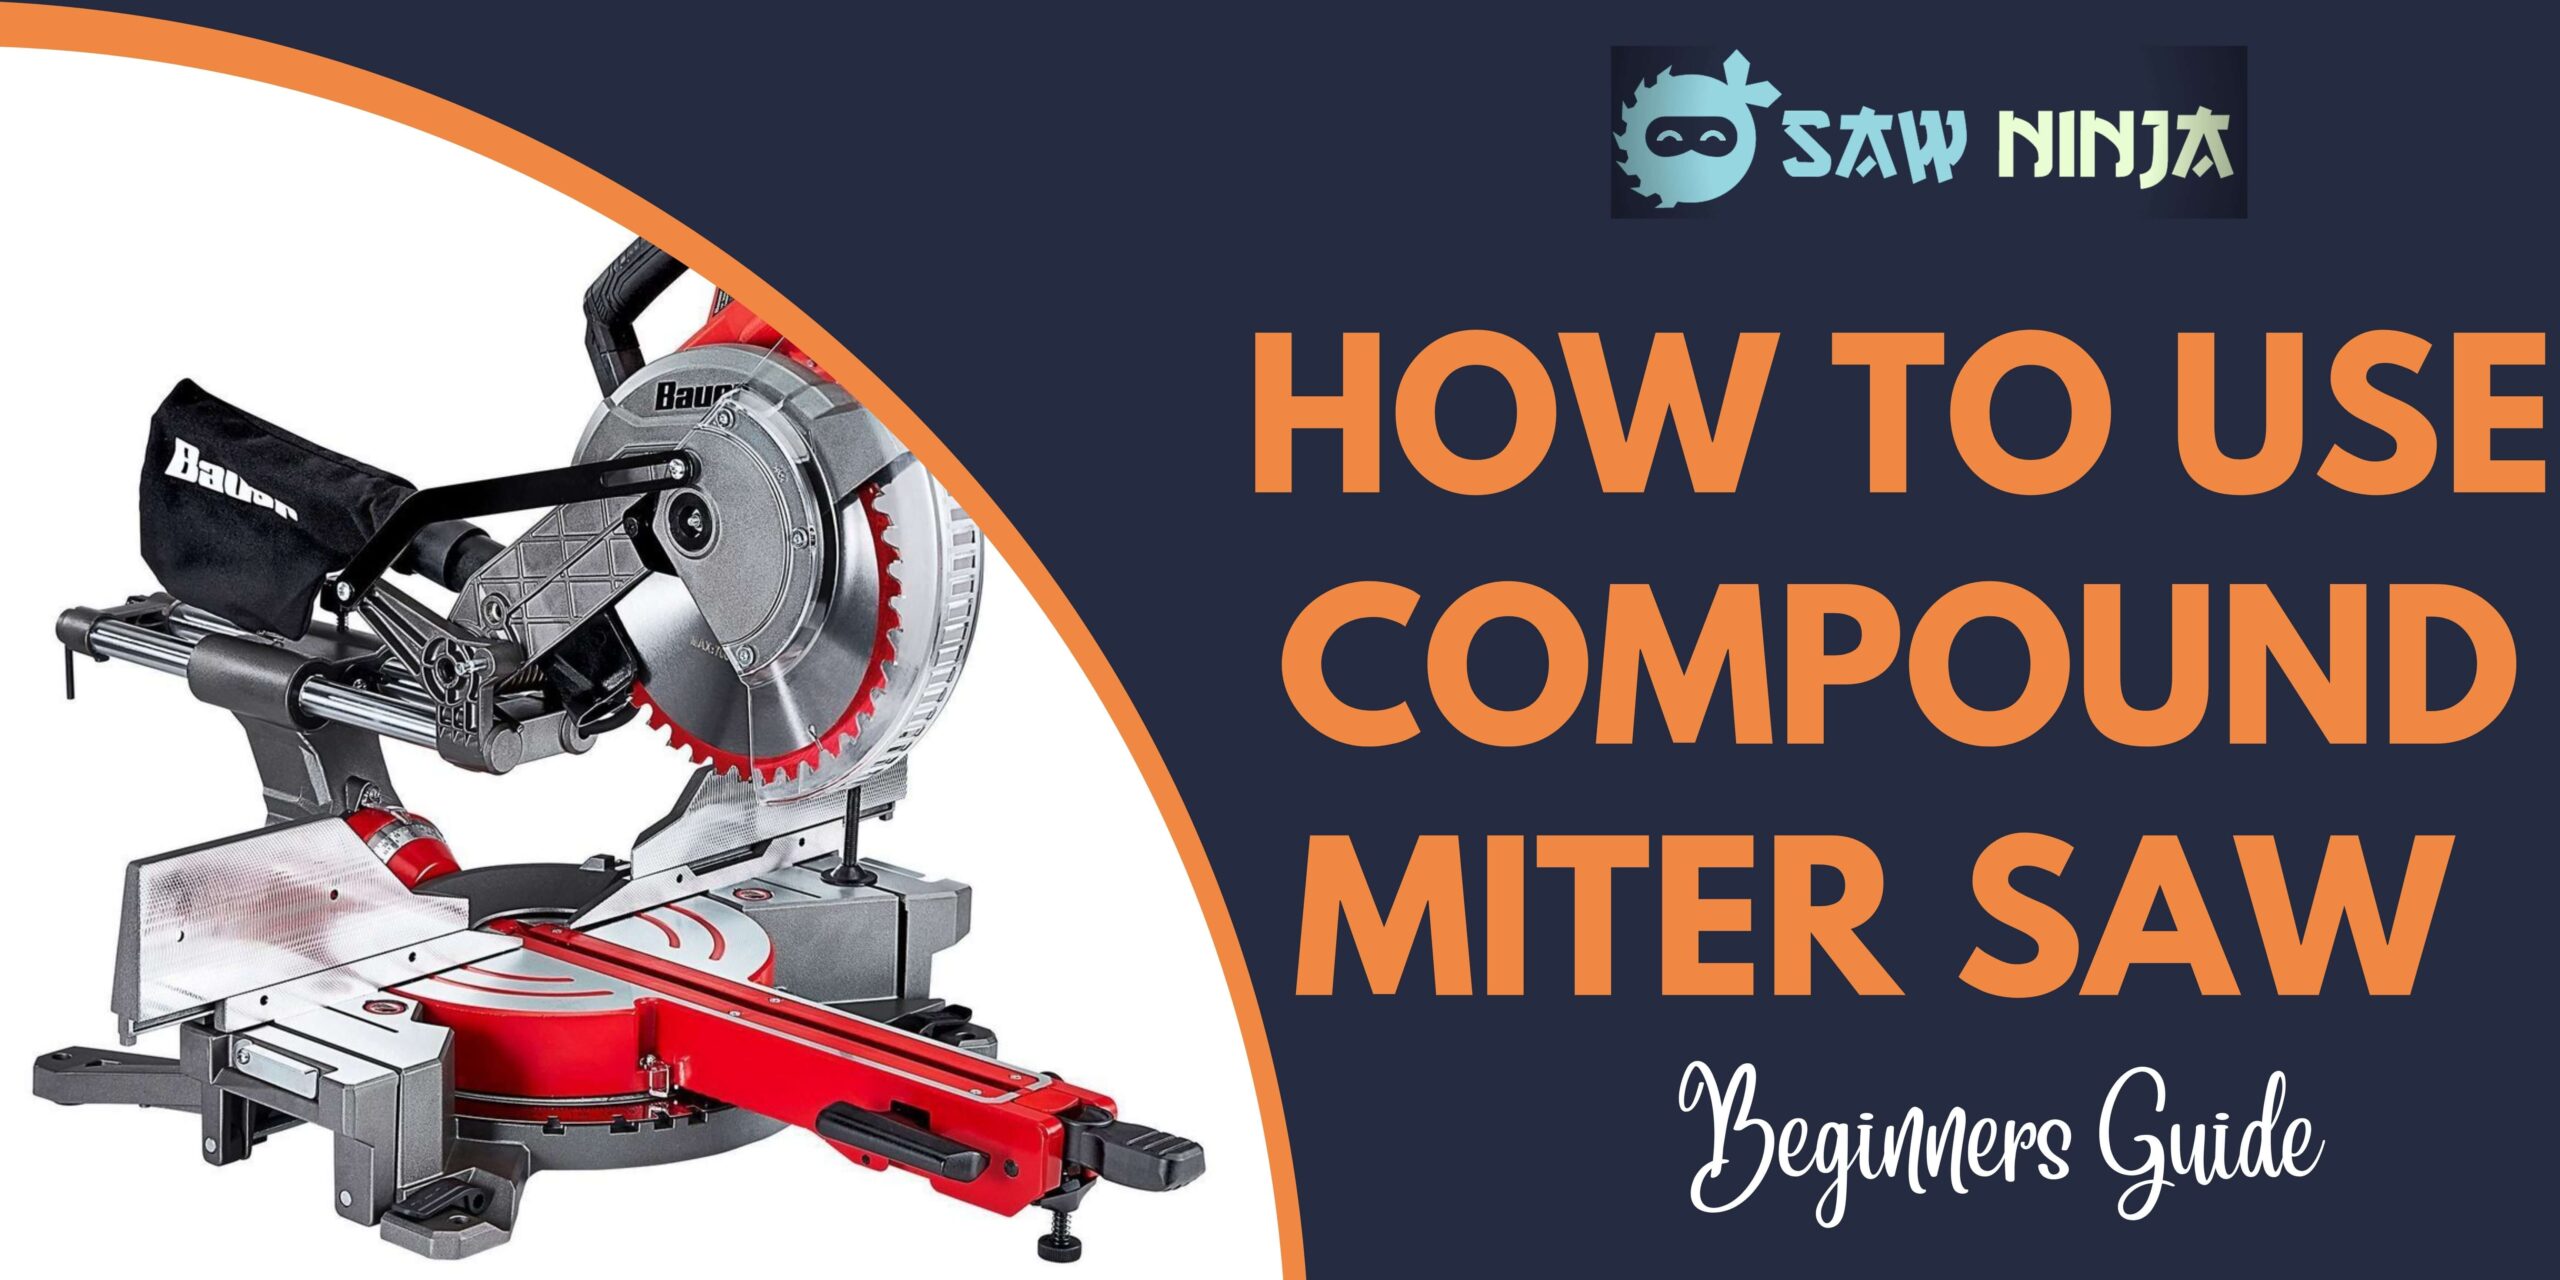 How to Use Compound Miter Saw